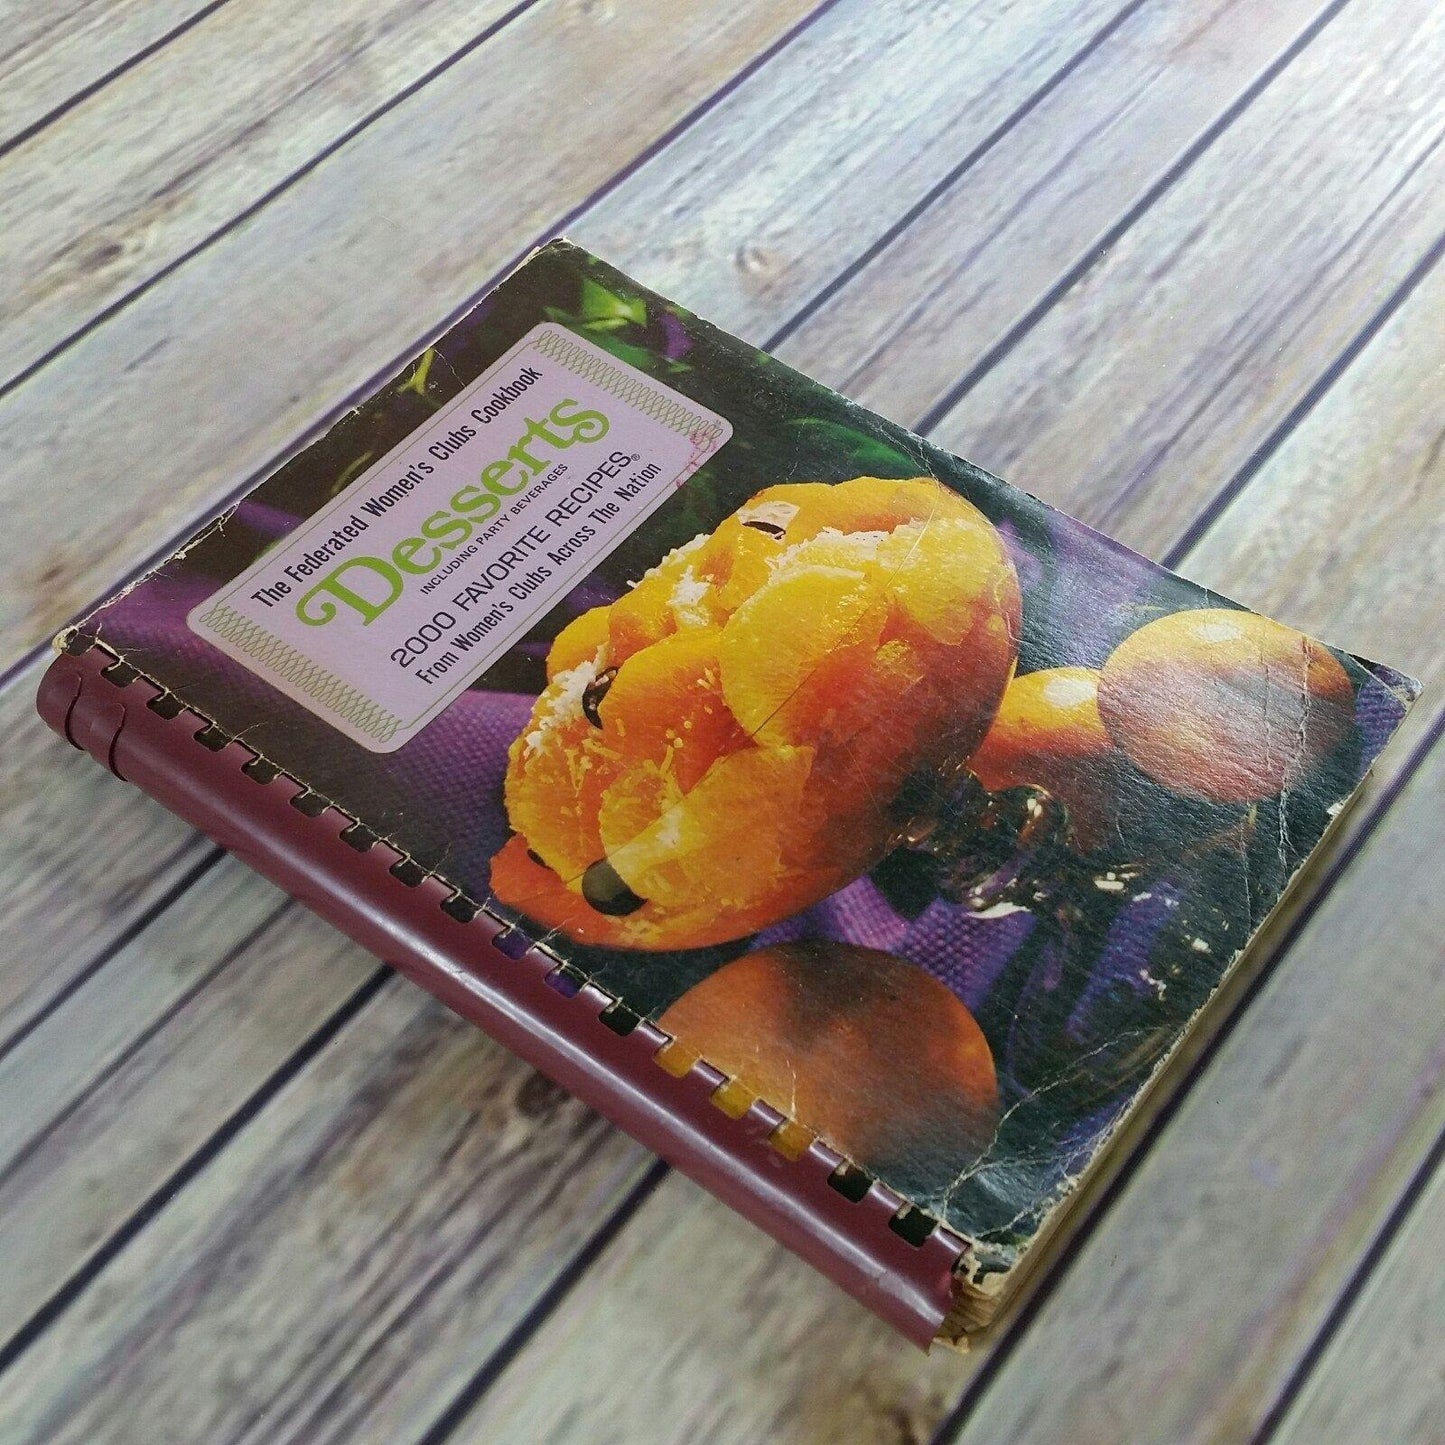 Vintage Desserts Cookbook Favorite Recipes Federated Womens Clubs Across the Nation 1969 Spiral Bound 2000 Favorite Dessert Recipes